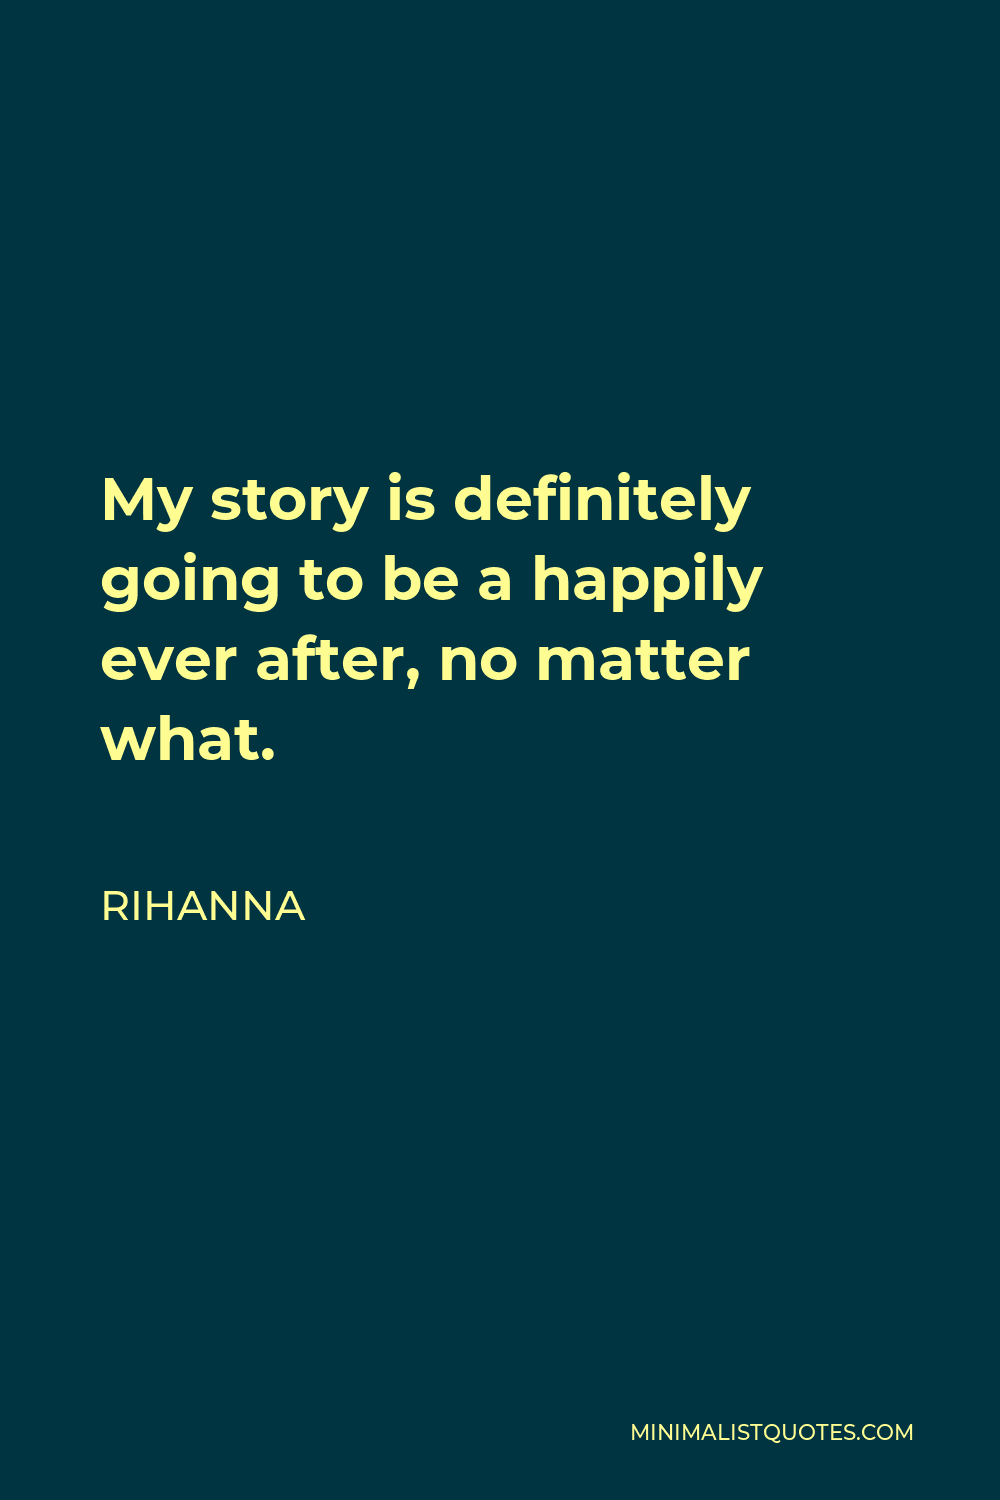 Rihanna Quote - My story is definitely going to be a happily ever after, no matter what.